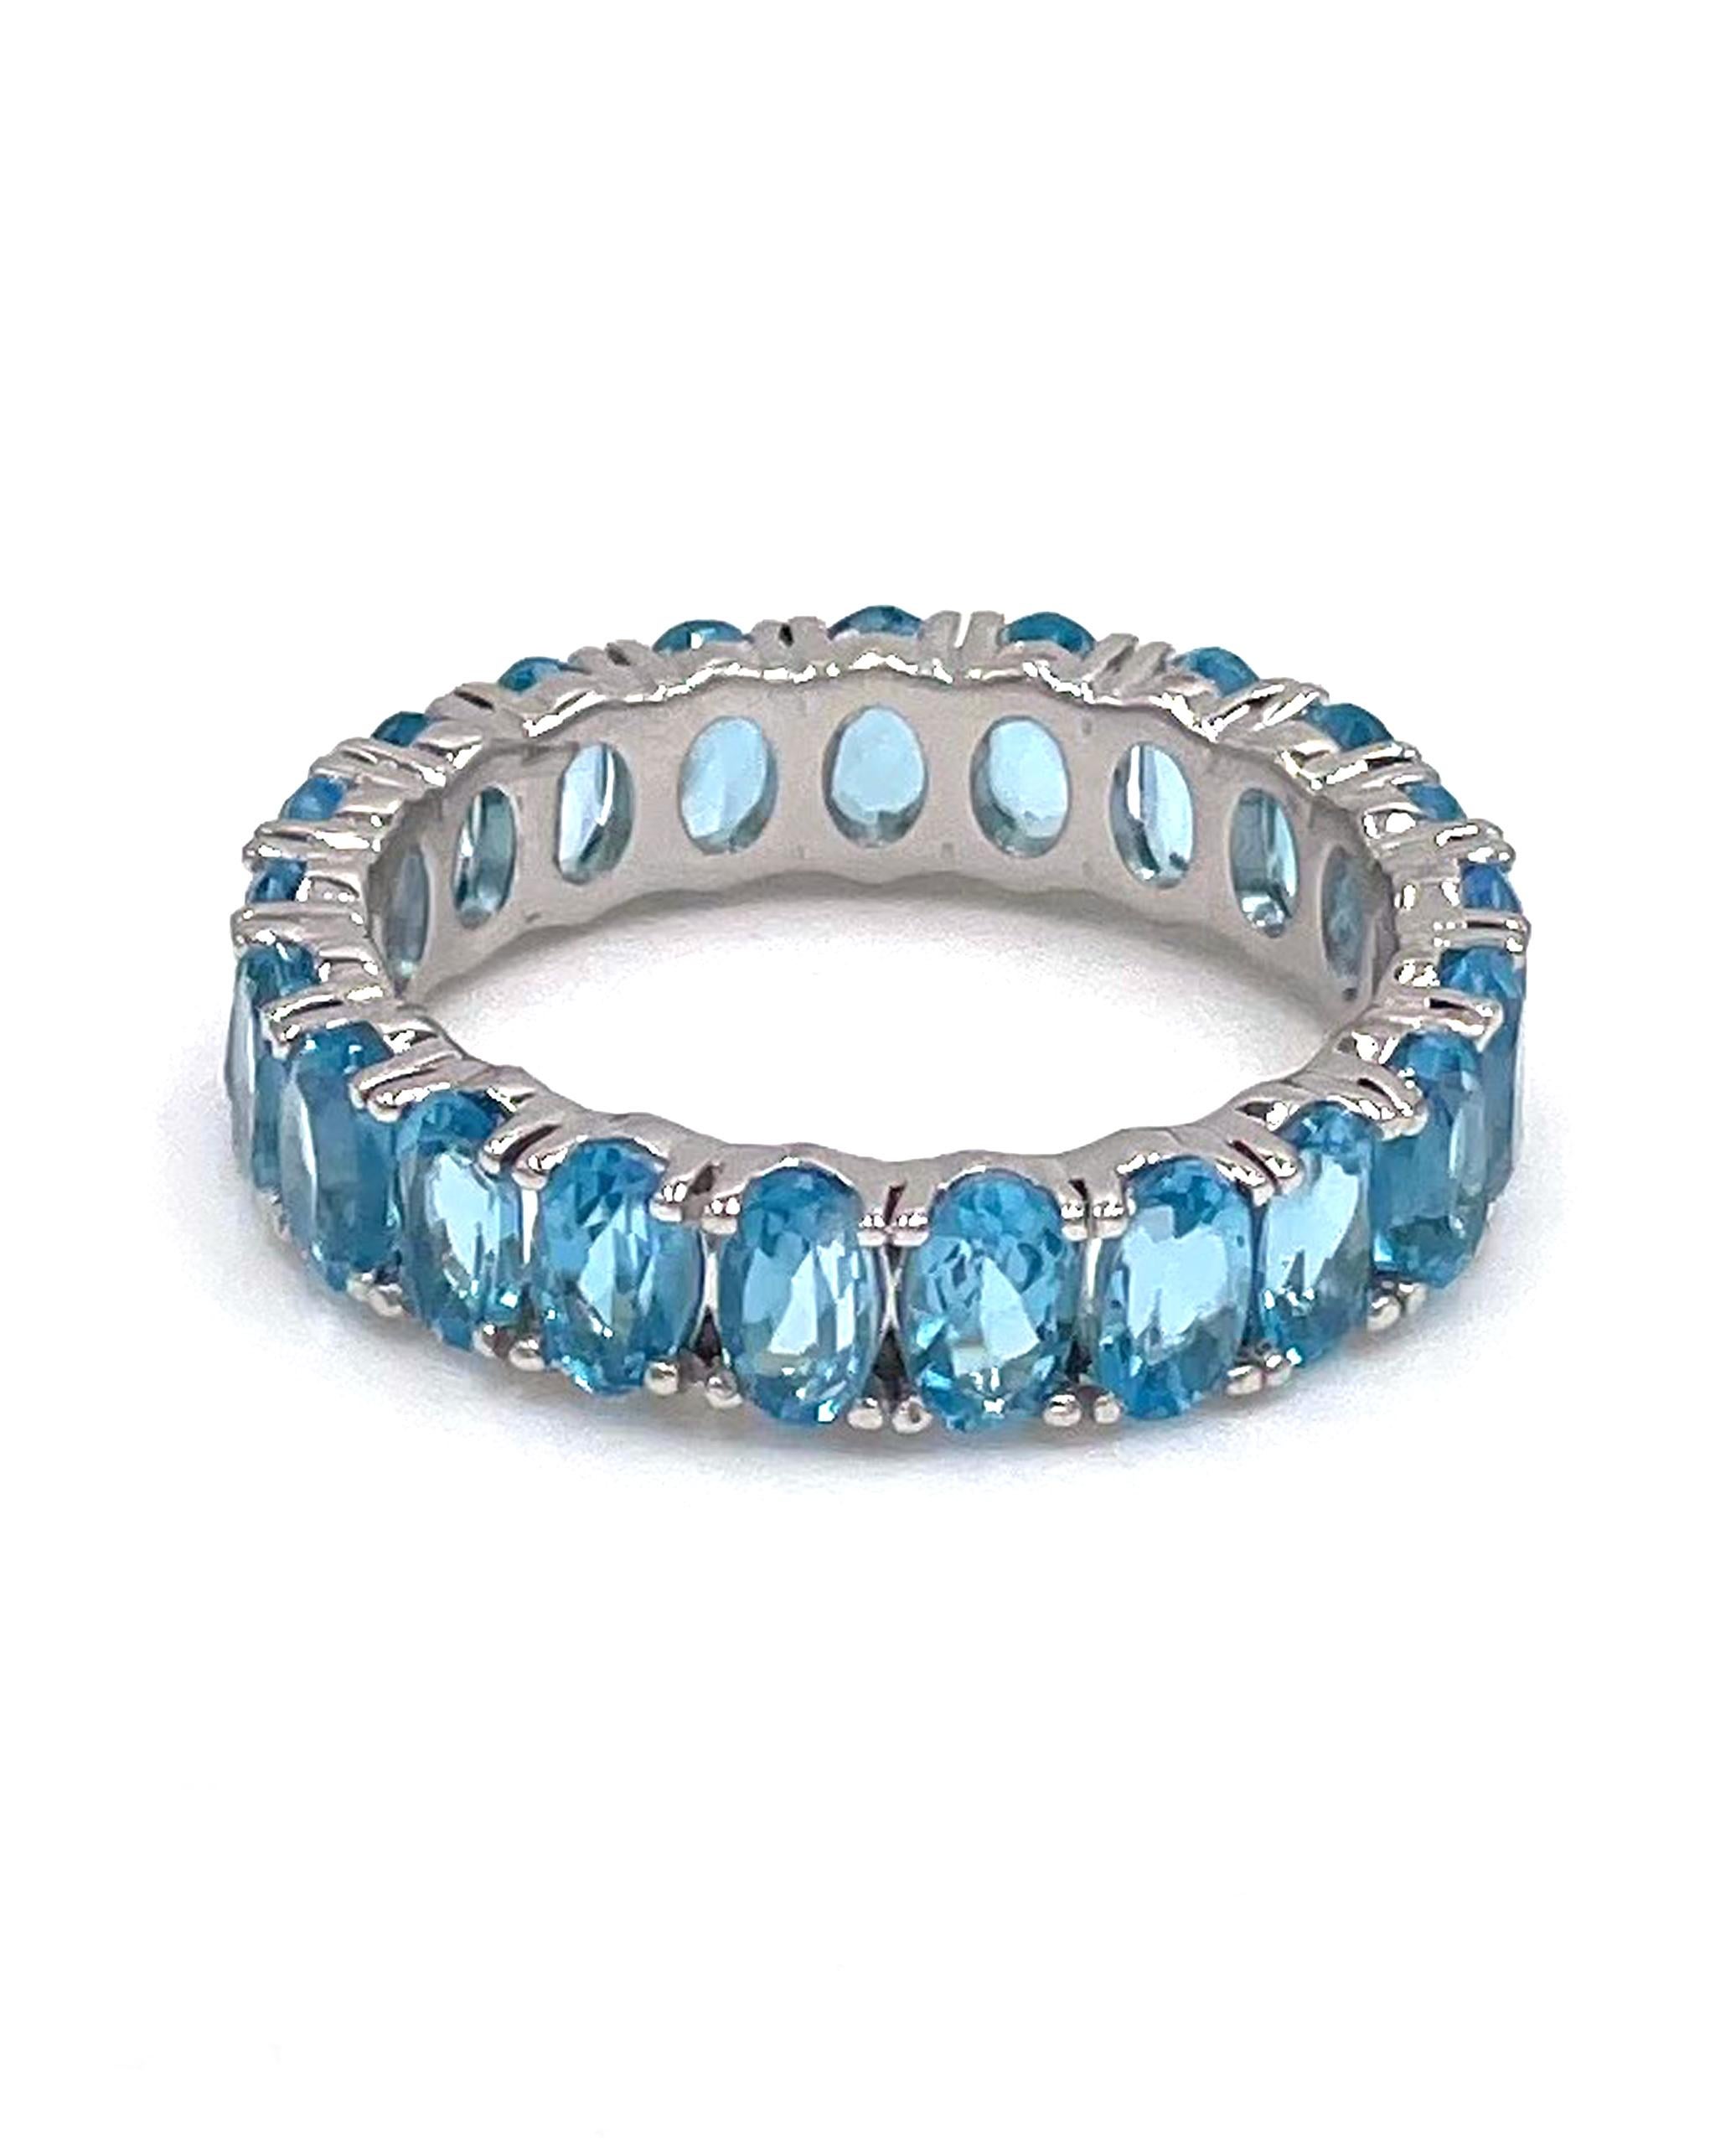 14K white gold eternity ring with 20 oval shaped sky blue topaz 5.51 carats total weight.

* Finger size 6.75
* 5.00mm wide